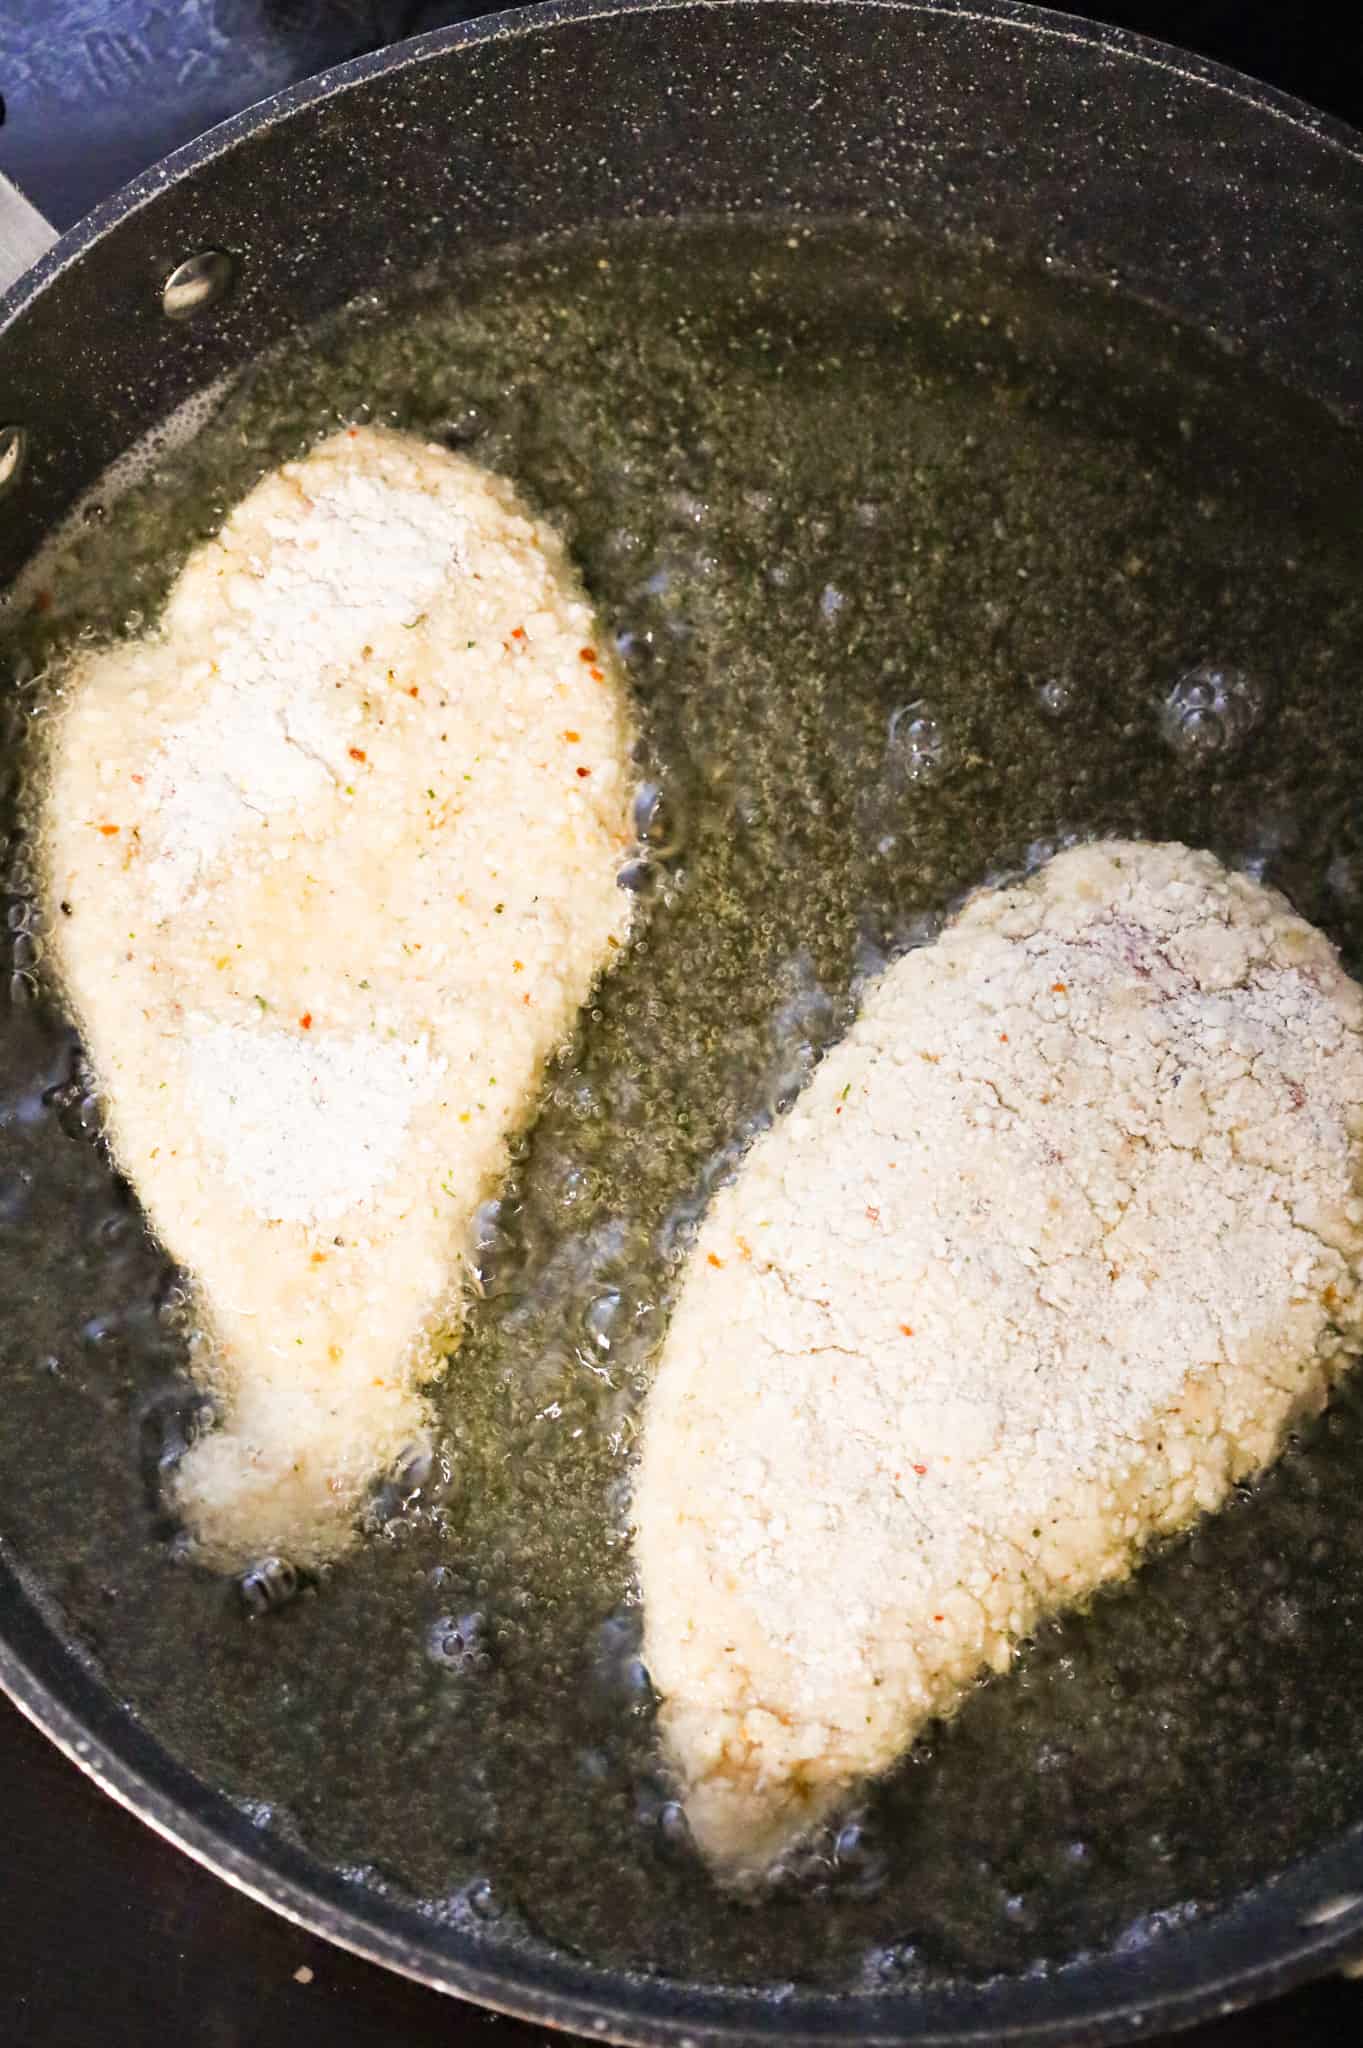 bread crumb coated chicken breasts frying in oil in a skillet